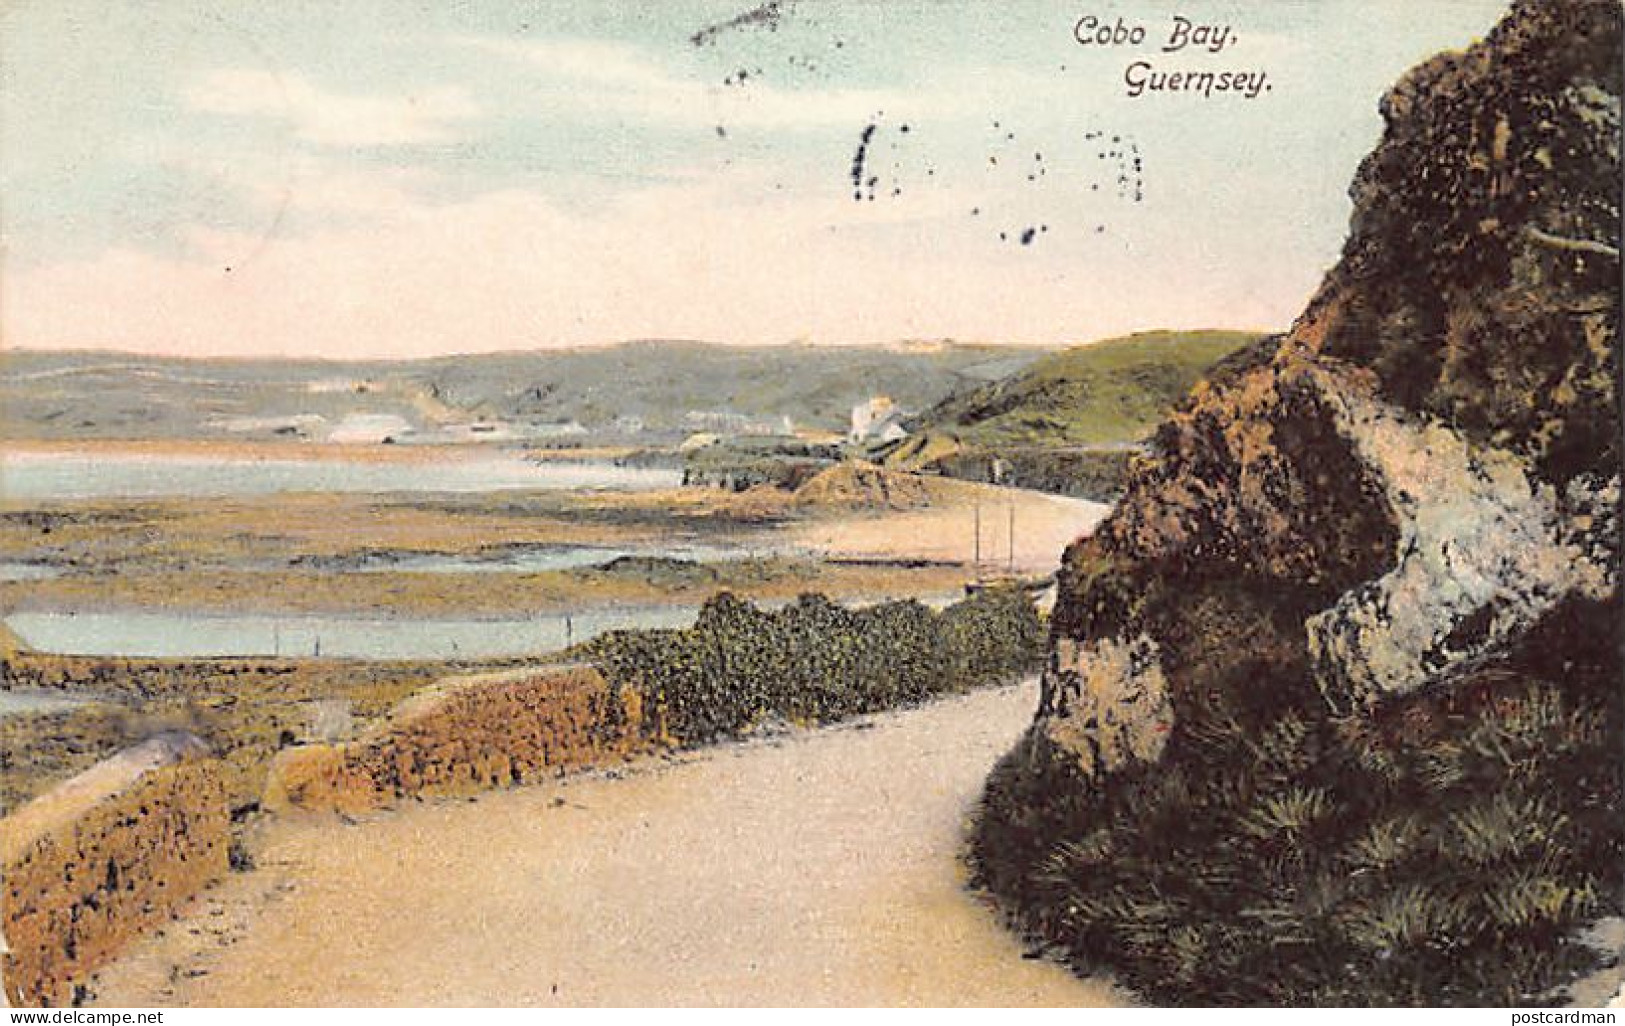 Guernsey - Cobo Bay - Publ. The Woodbury Series 2413 - Guernsey